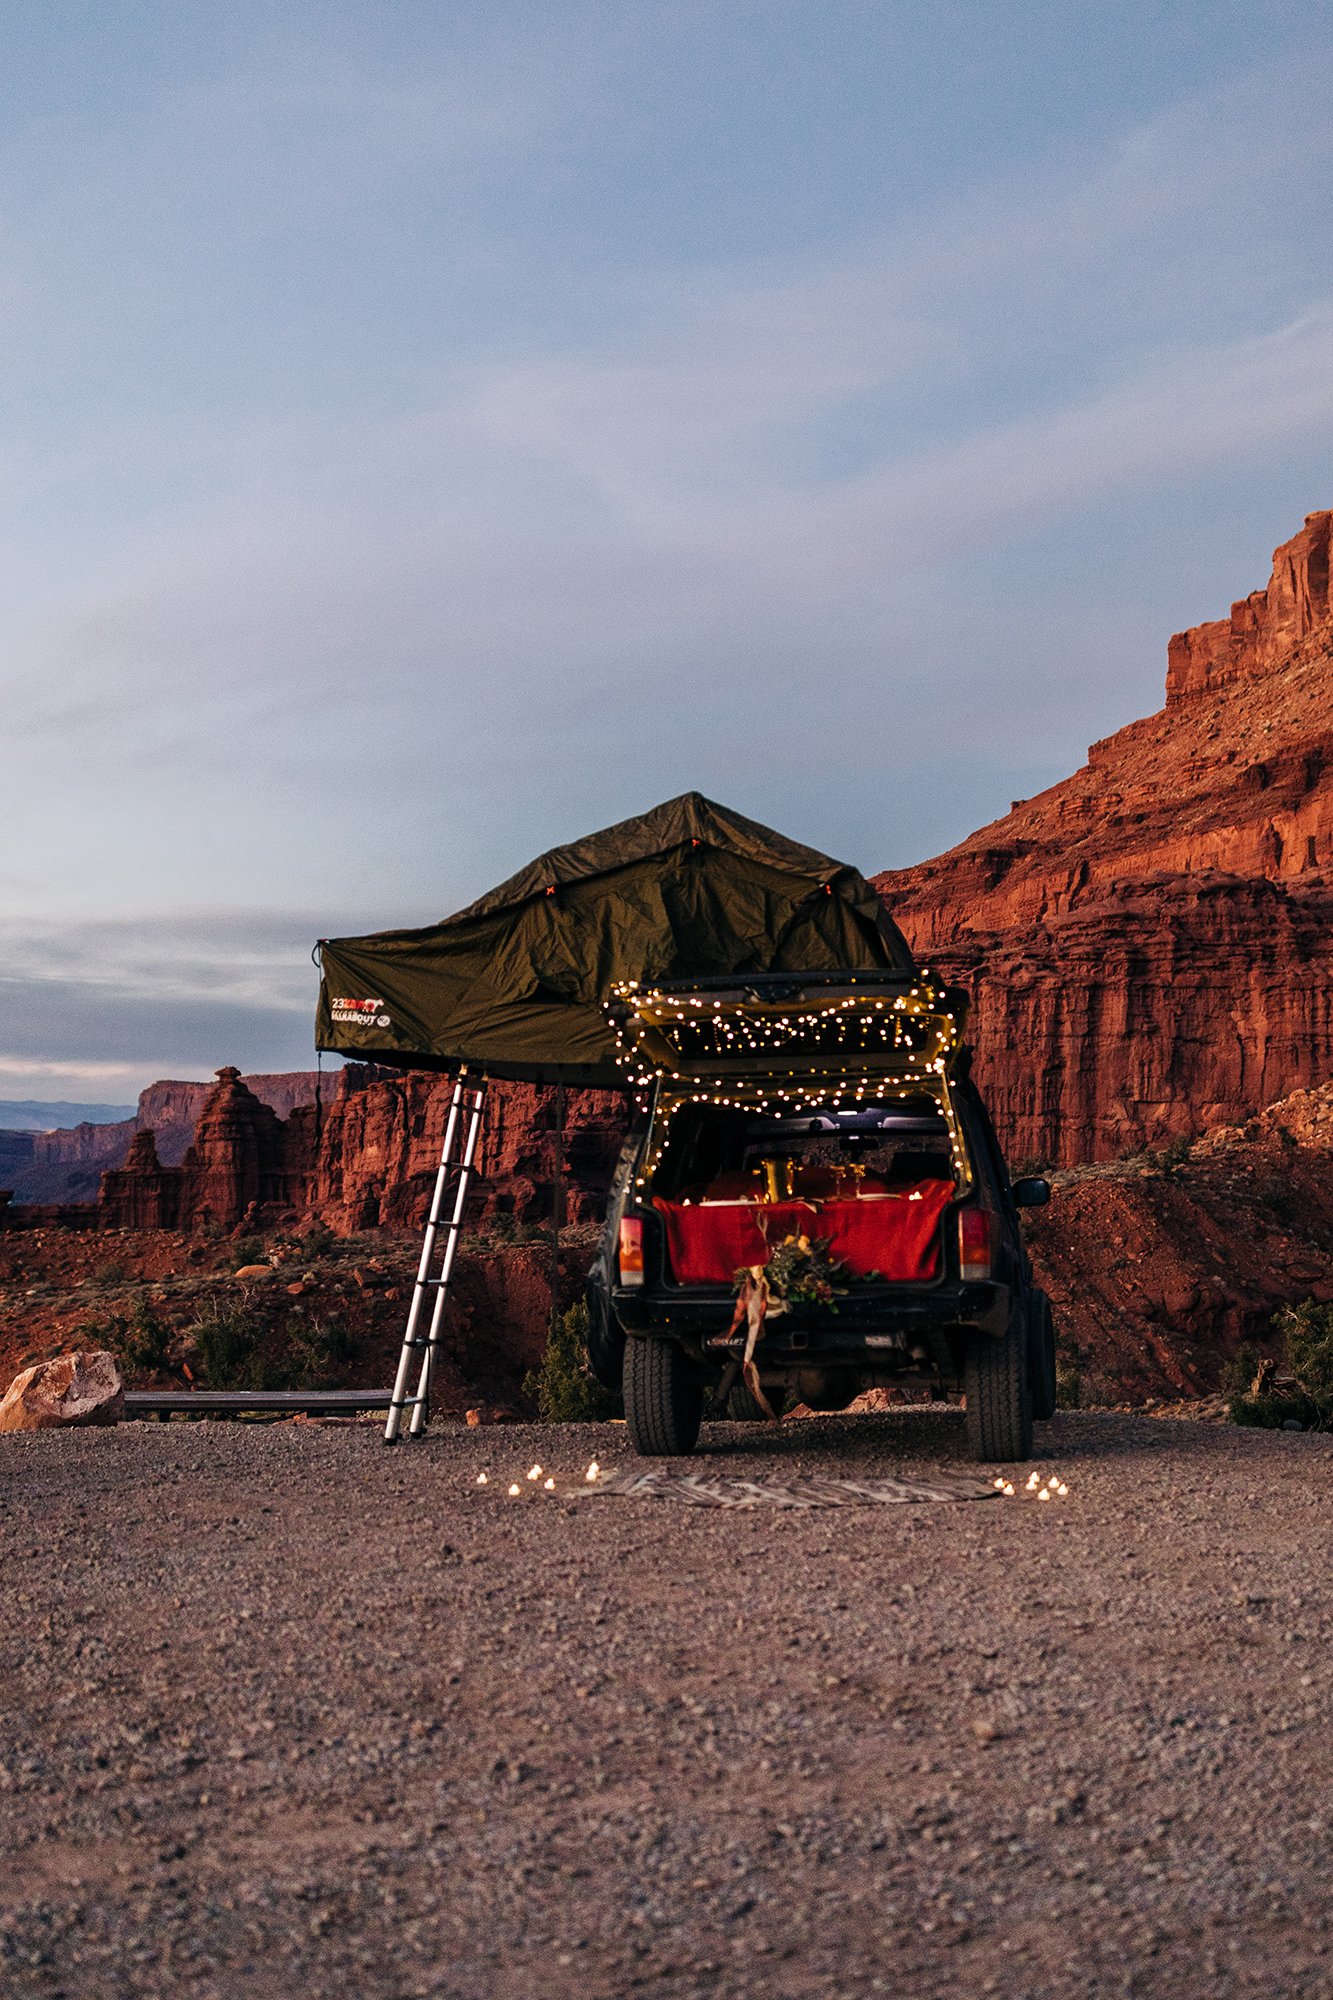 An offroading vehicle with a tent at a campsite in Moab, Utah.